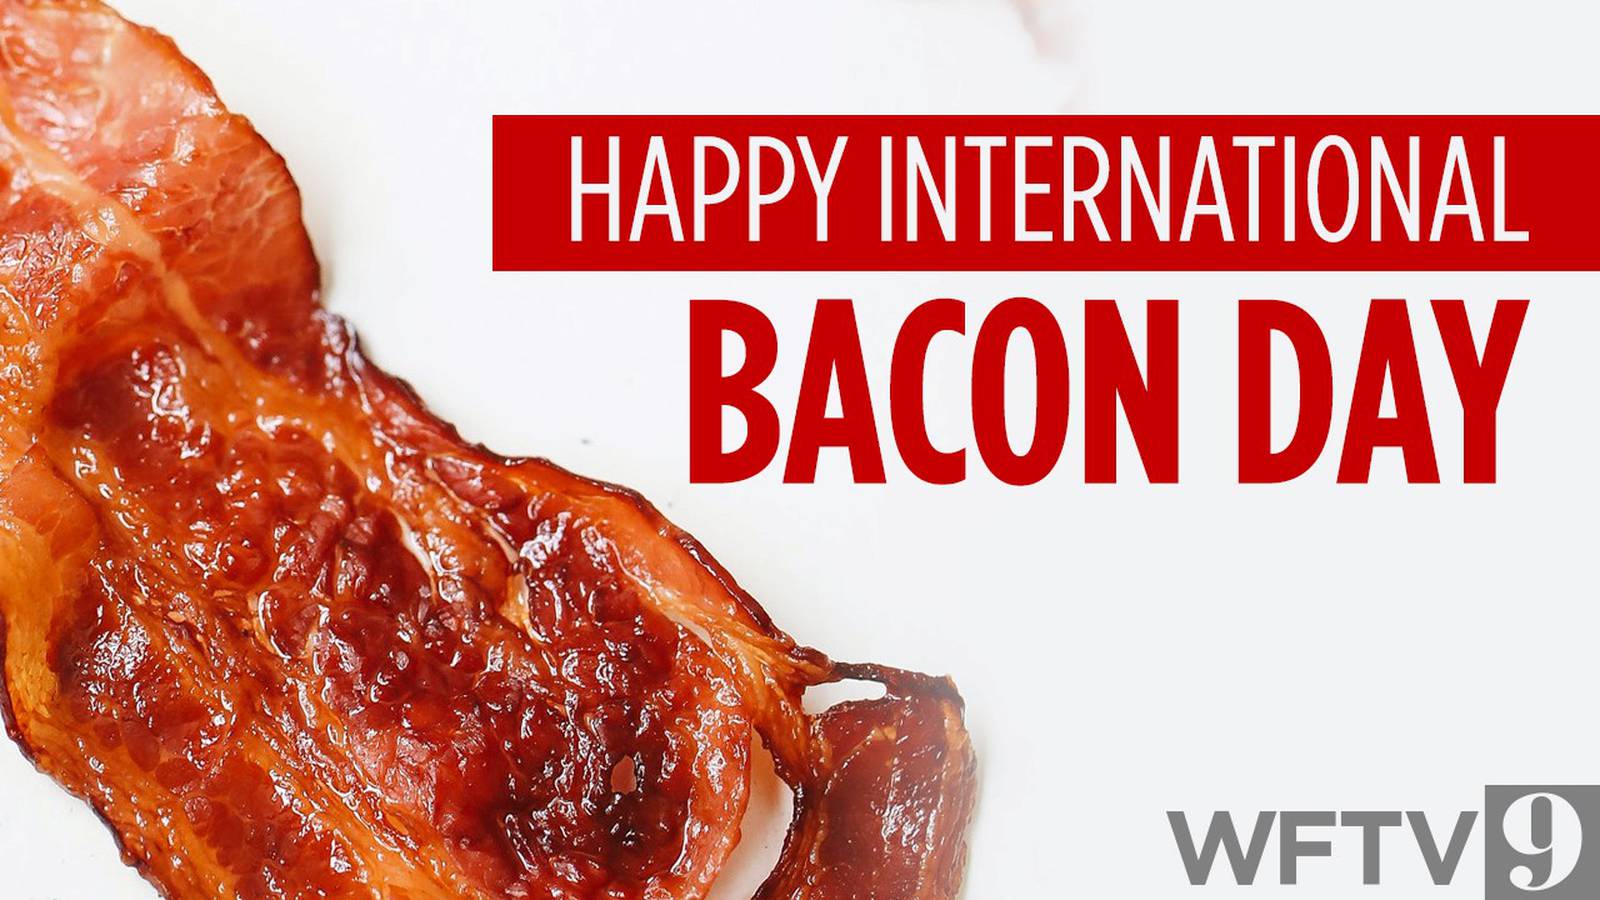 Happy International Bacon Day! 9 delicious facts about the popular meat